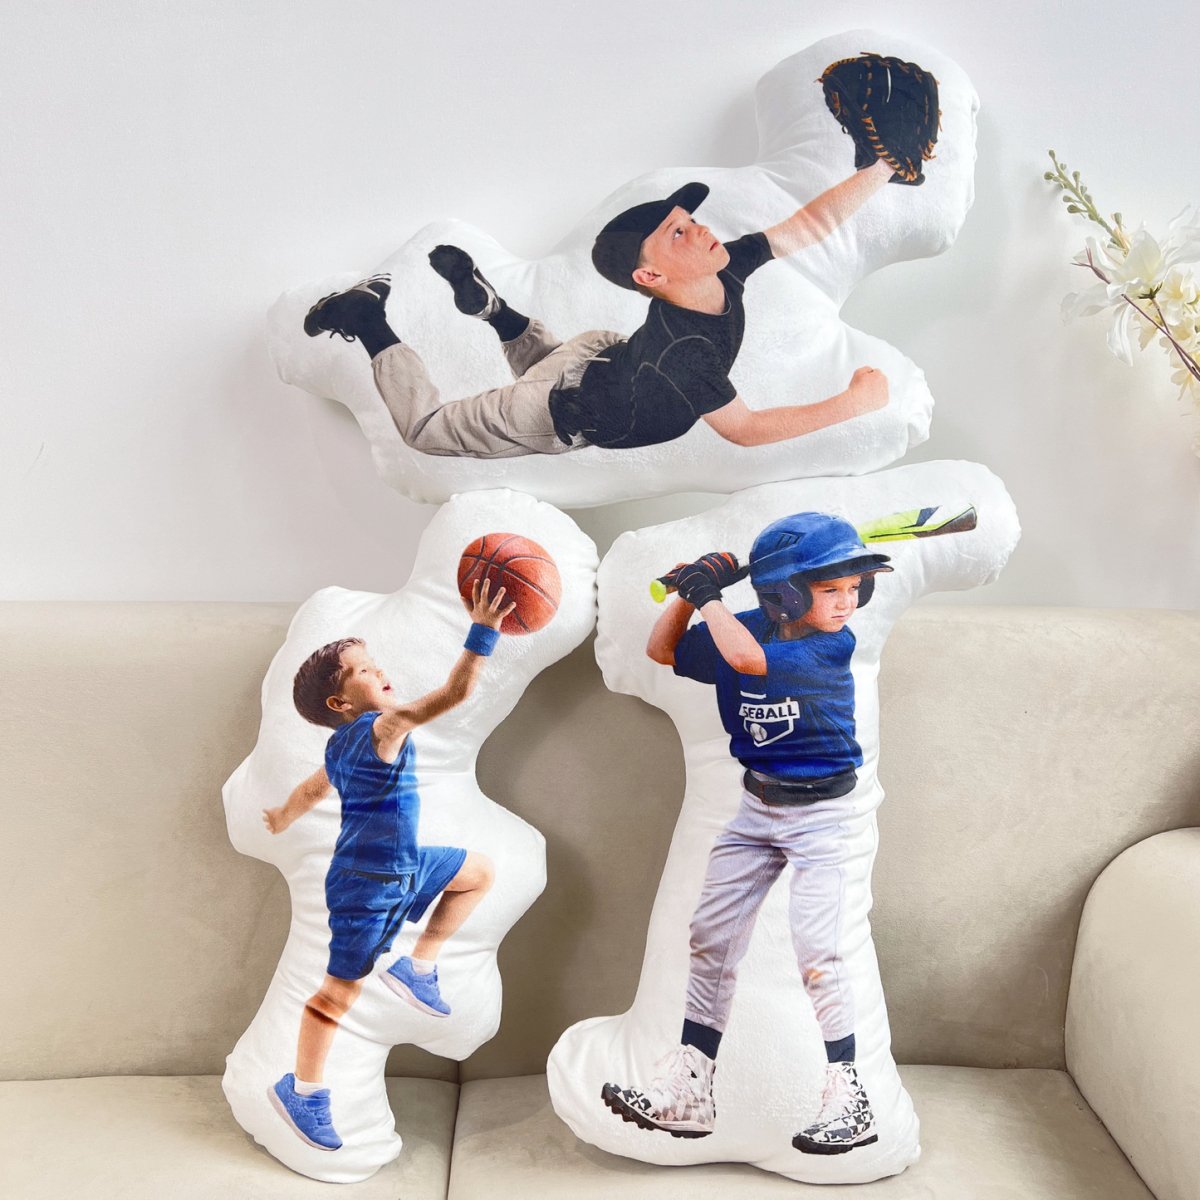 Sport Lovers - Baseball Boys Girls Gifts For Son Daughter Grandkids - Personalized Photo Custom Shaped Pillow - The Next Custom Gift